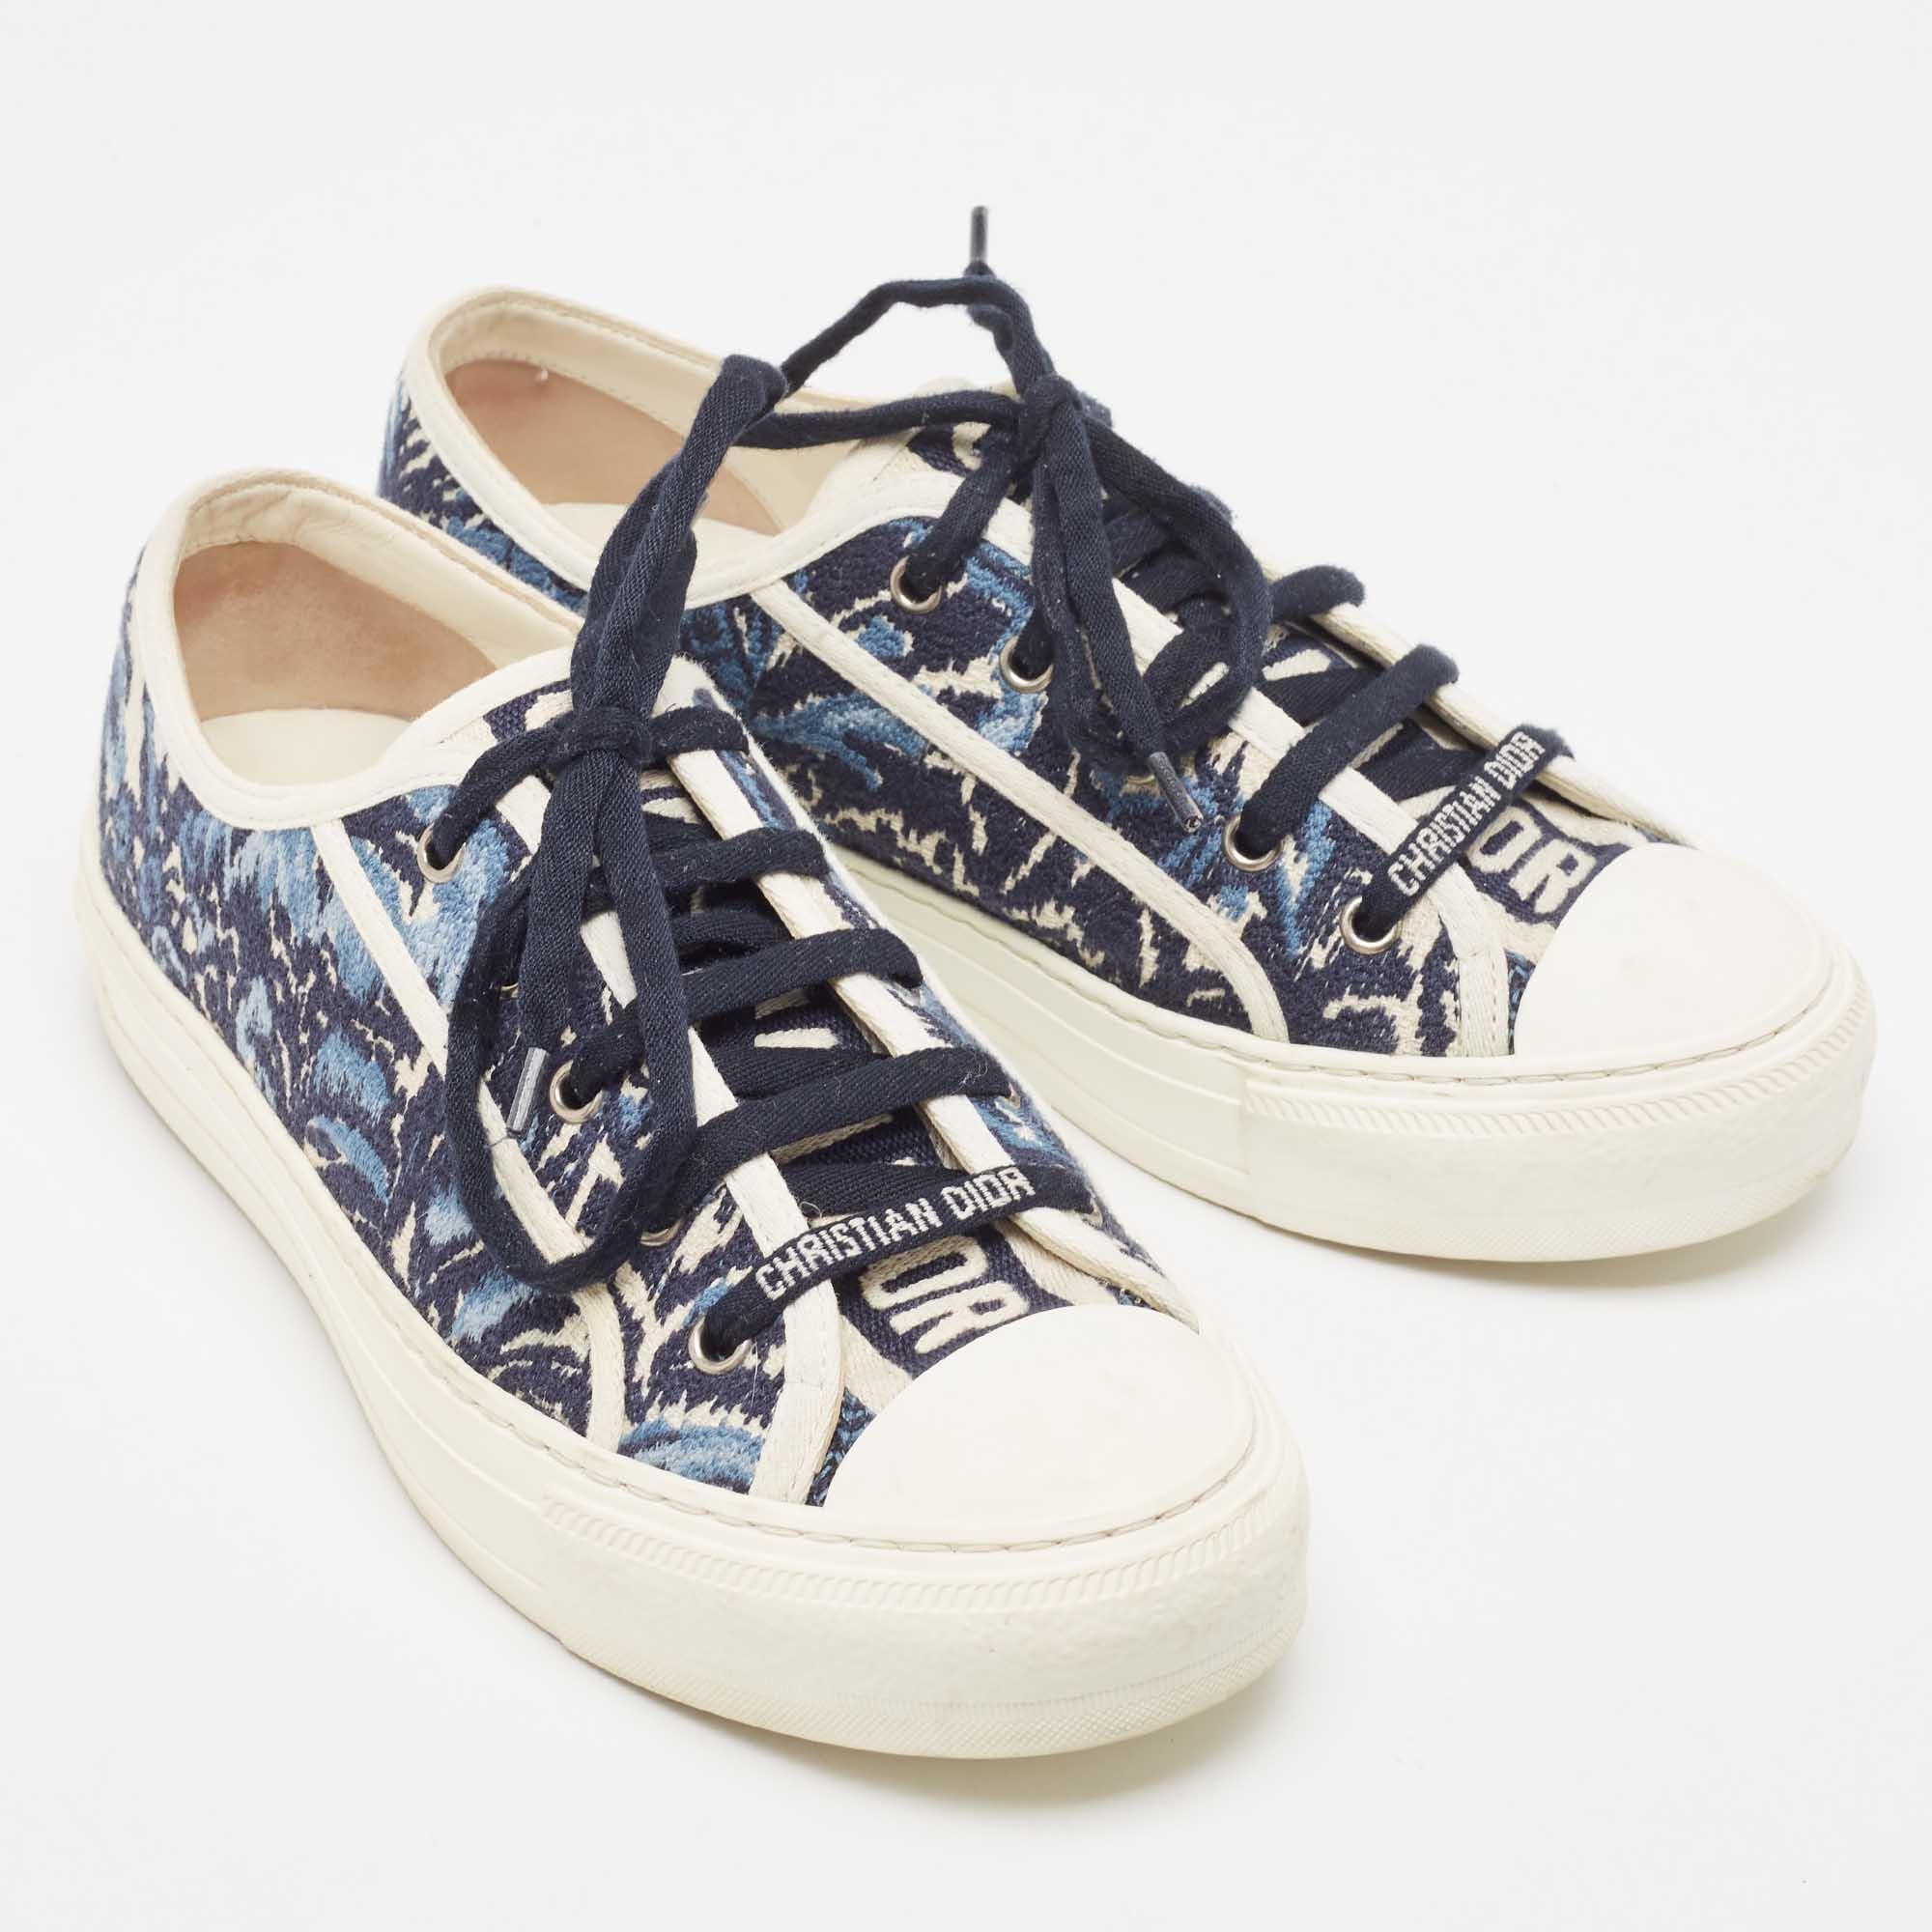 Dior Navy Blue/White Floral Embroidered Canvas Walk'n'Dior Sneakers Size 39 In Good Condition For Sale In Dubai, Al Qouz 2